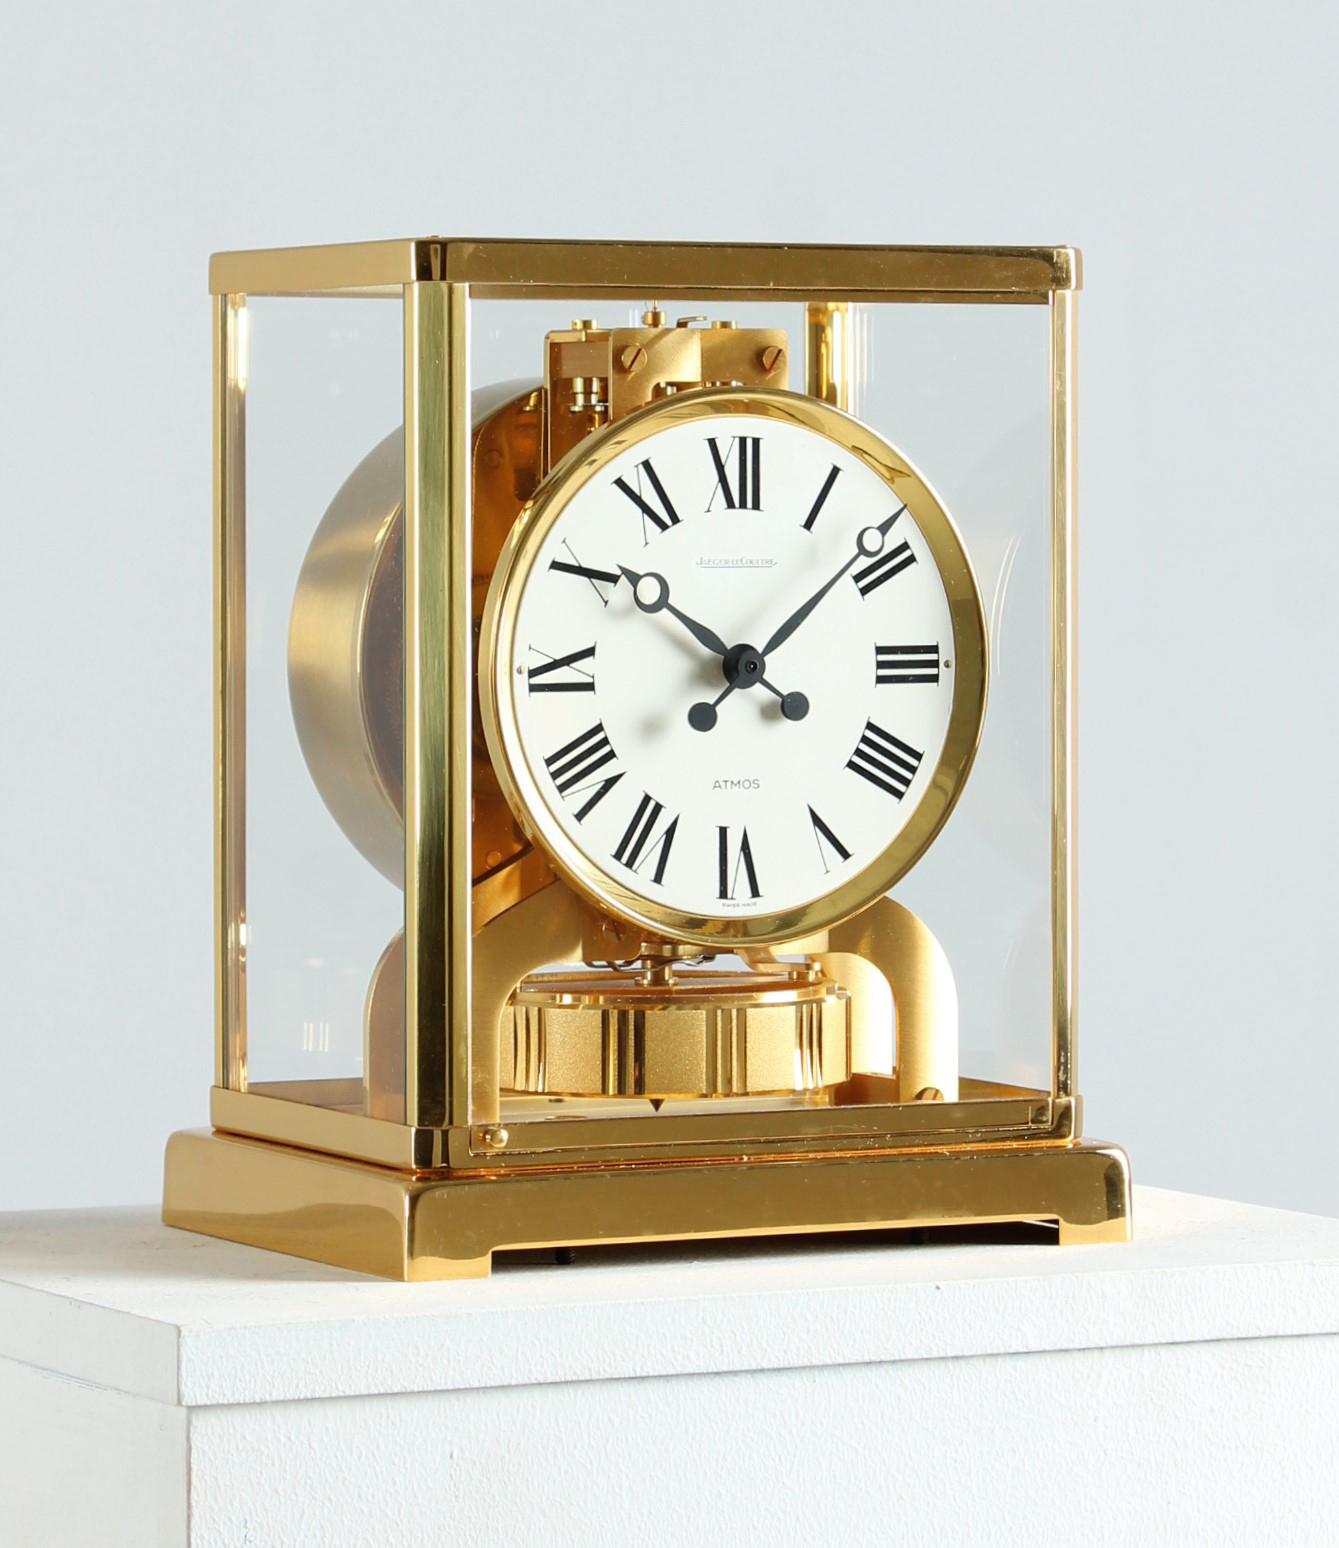 Swiss Jaeger LeCoultre, Atmos Clock From 1980 With Full Dial For Sale